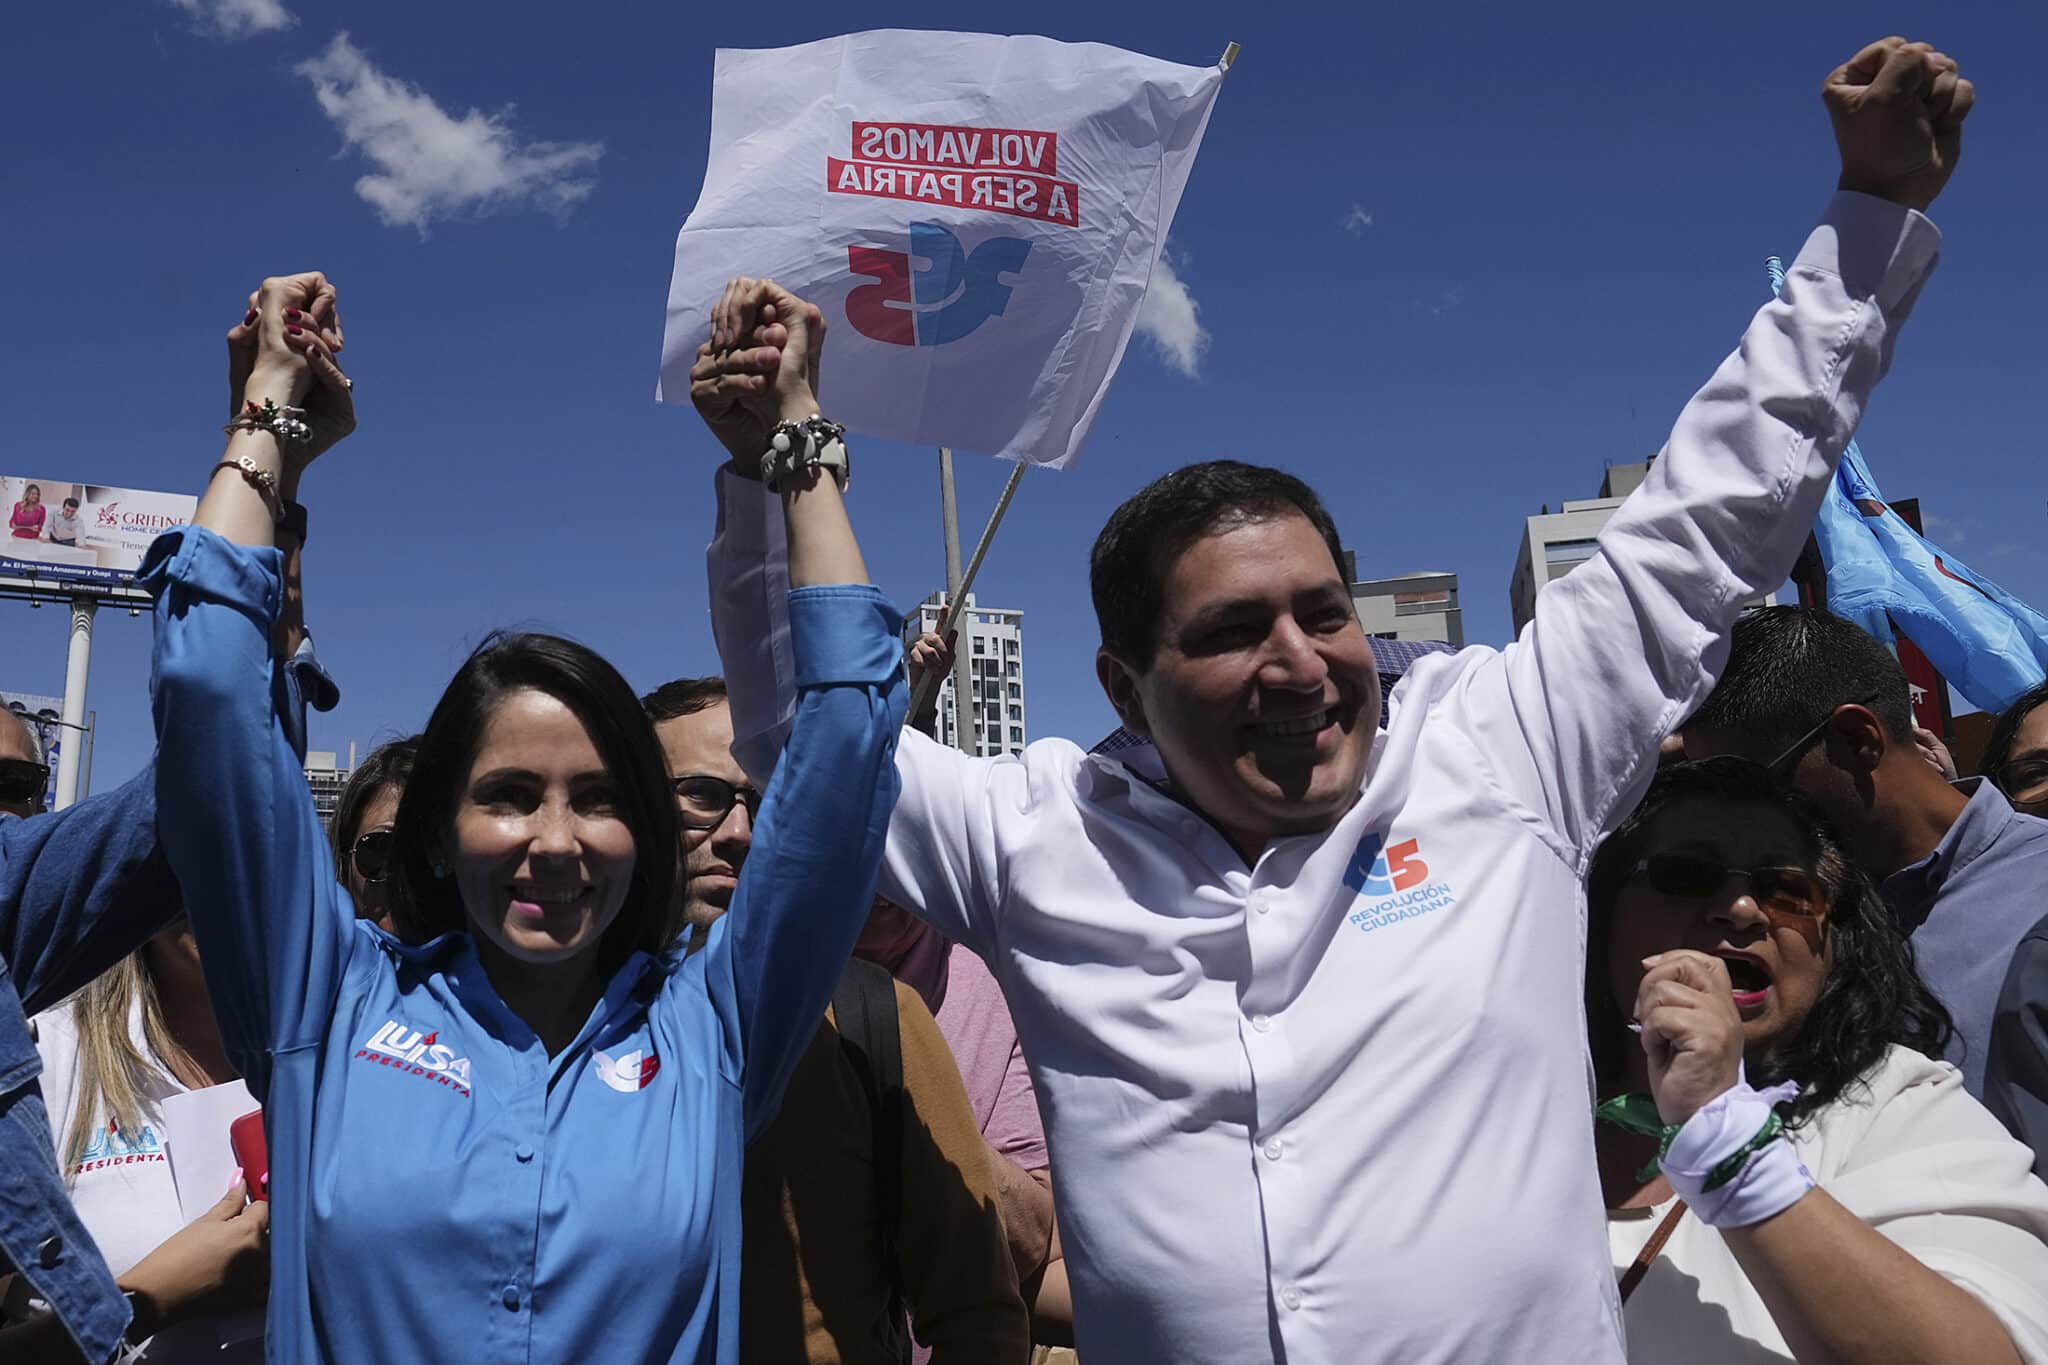 Citizens' Revolution presidential candidate Luisa González (left) and her vice-presidential running mate Andrés Arauz (right) on their electoral campaign. Photo: Bloomberg.